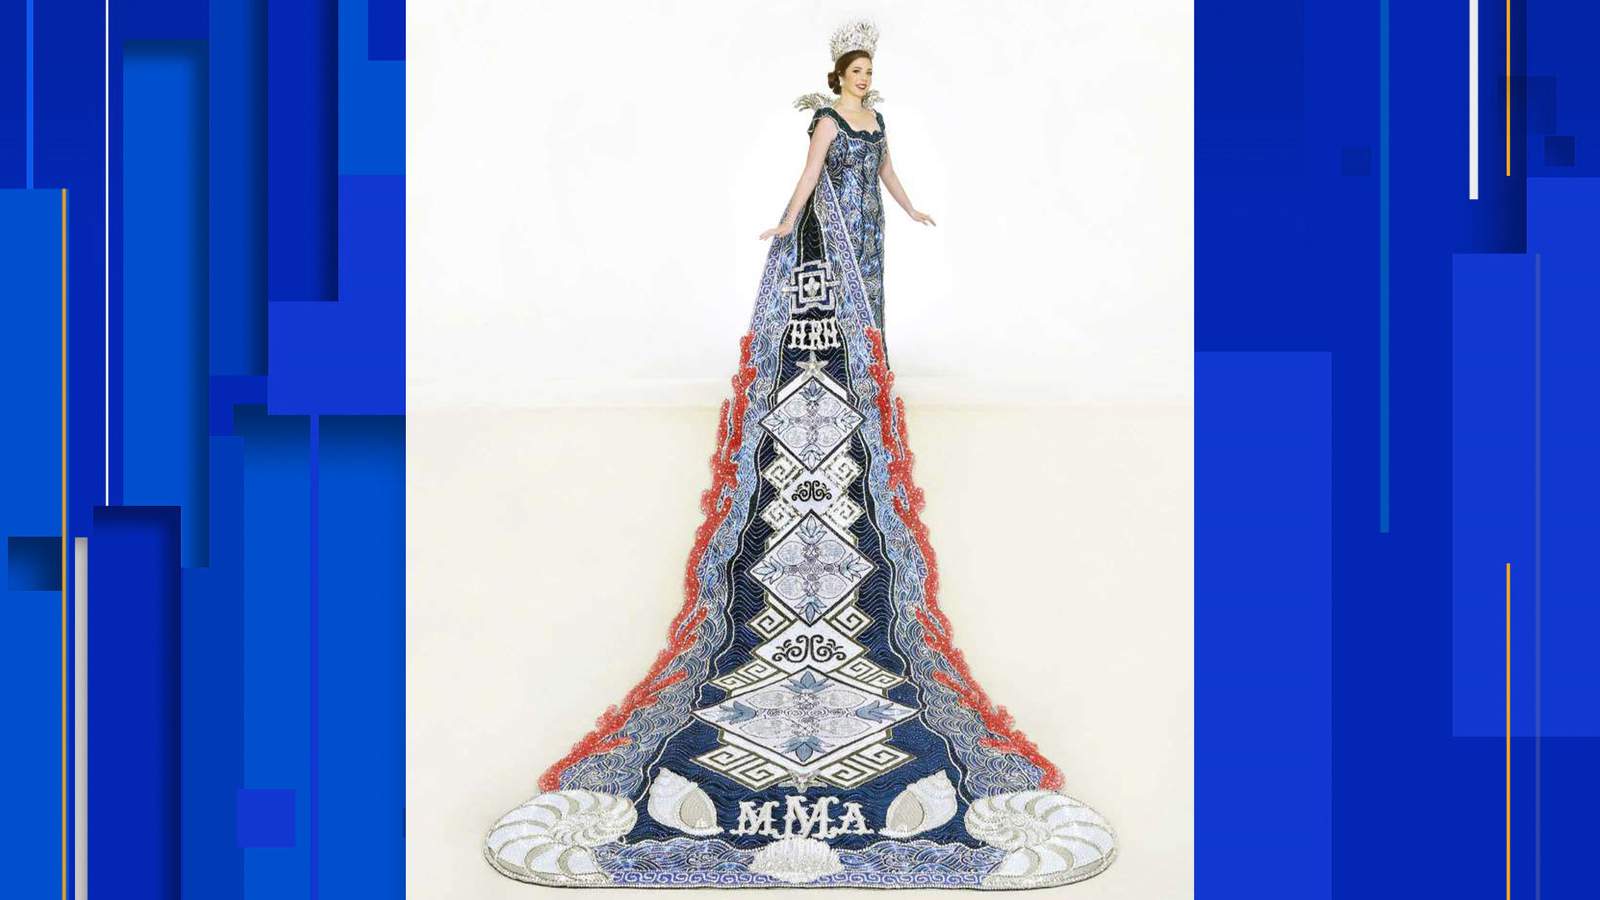 Witte Museum ‘Fiesta Couture: Behind the Seams’ exhibit to showcase coronation gowns